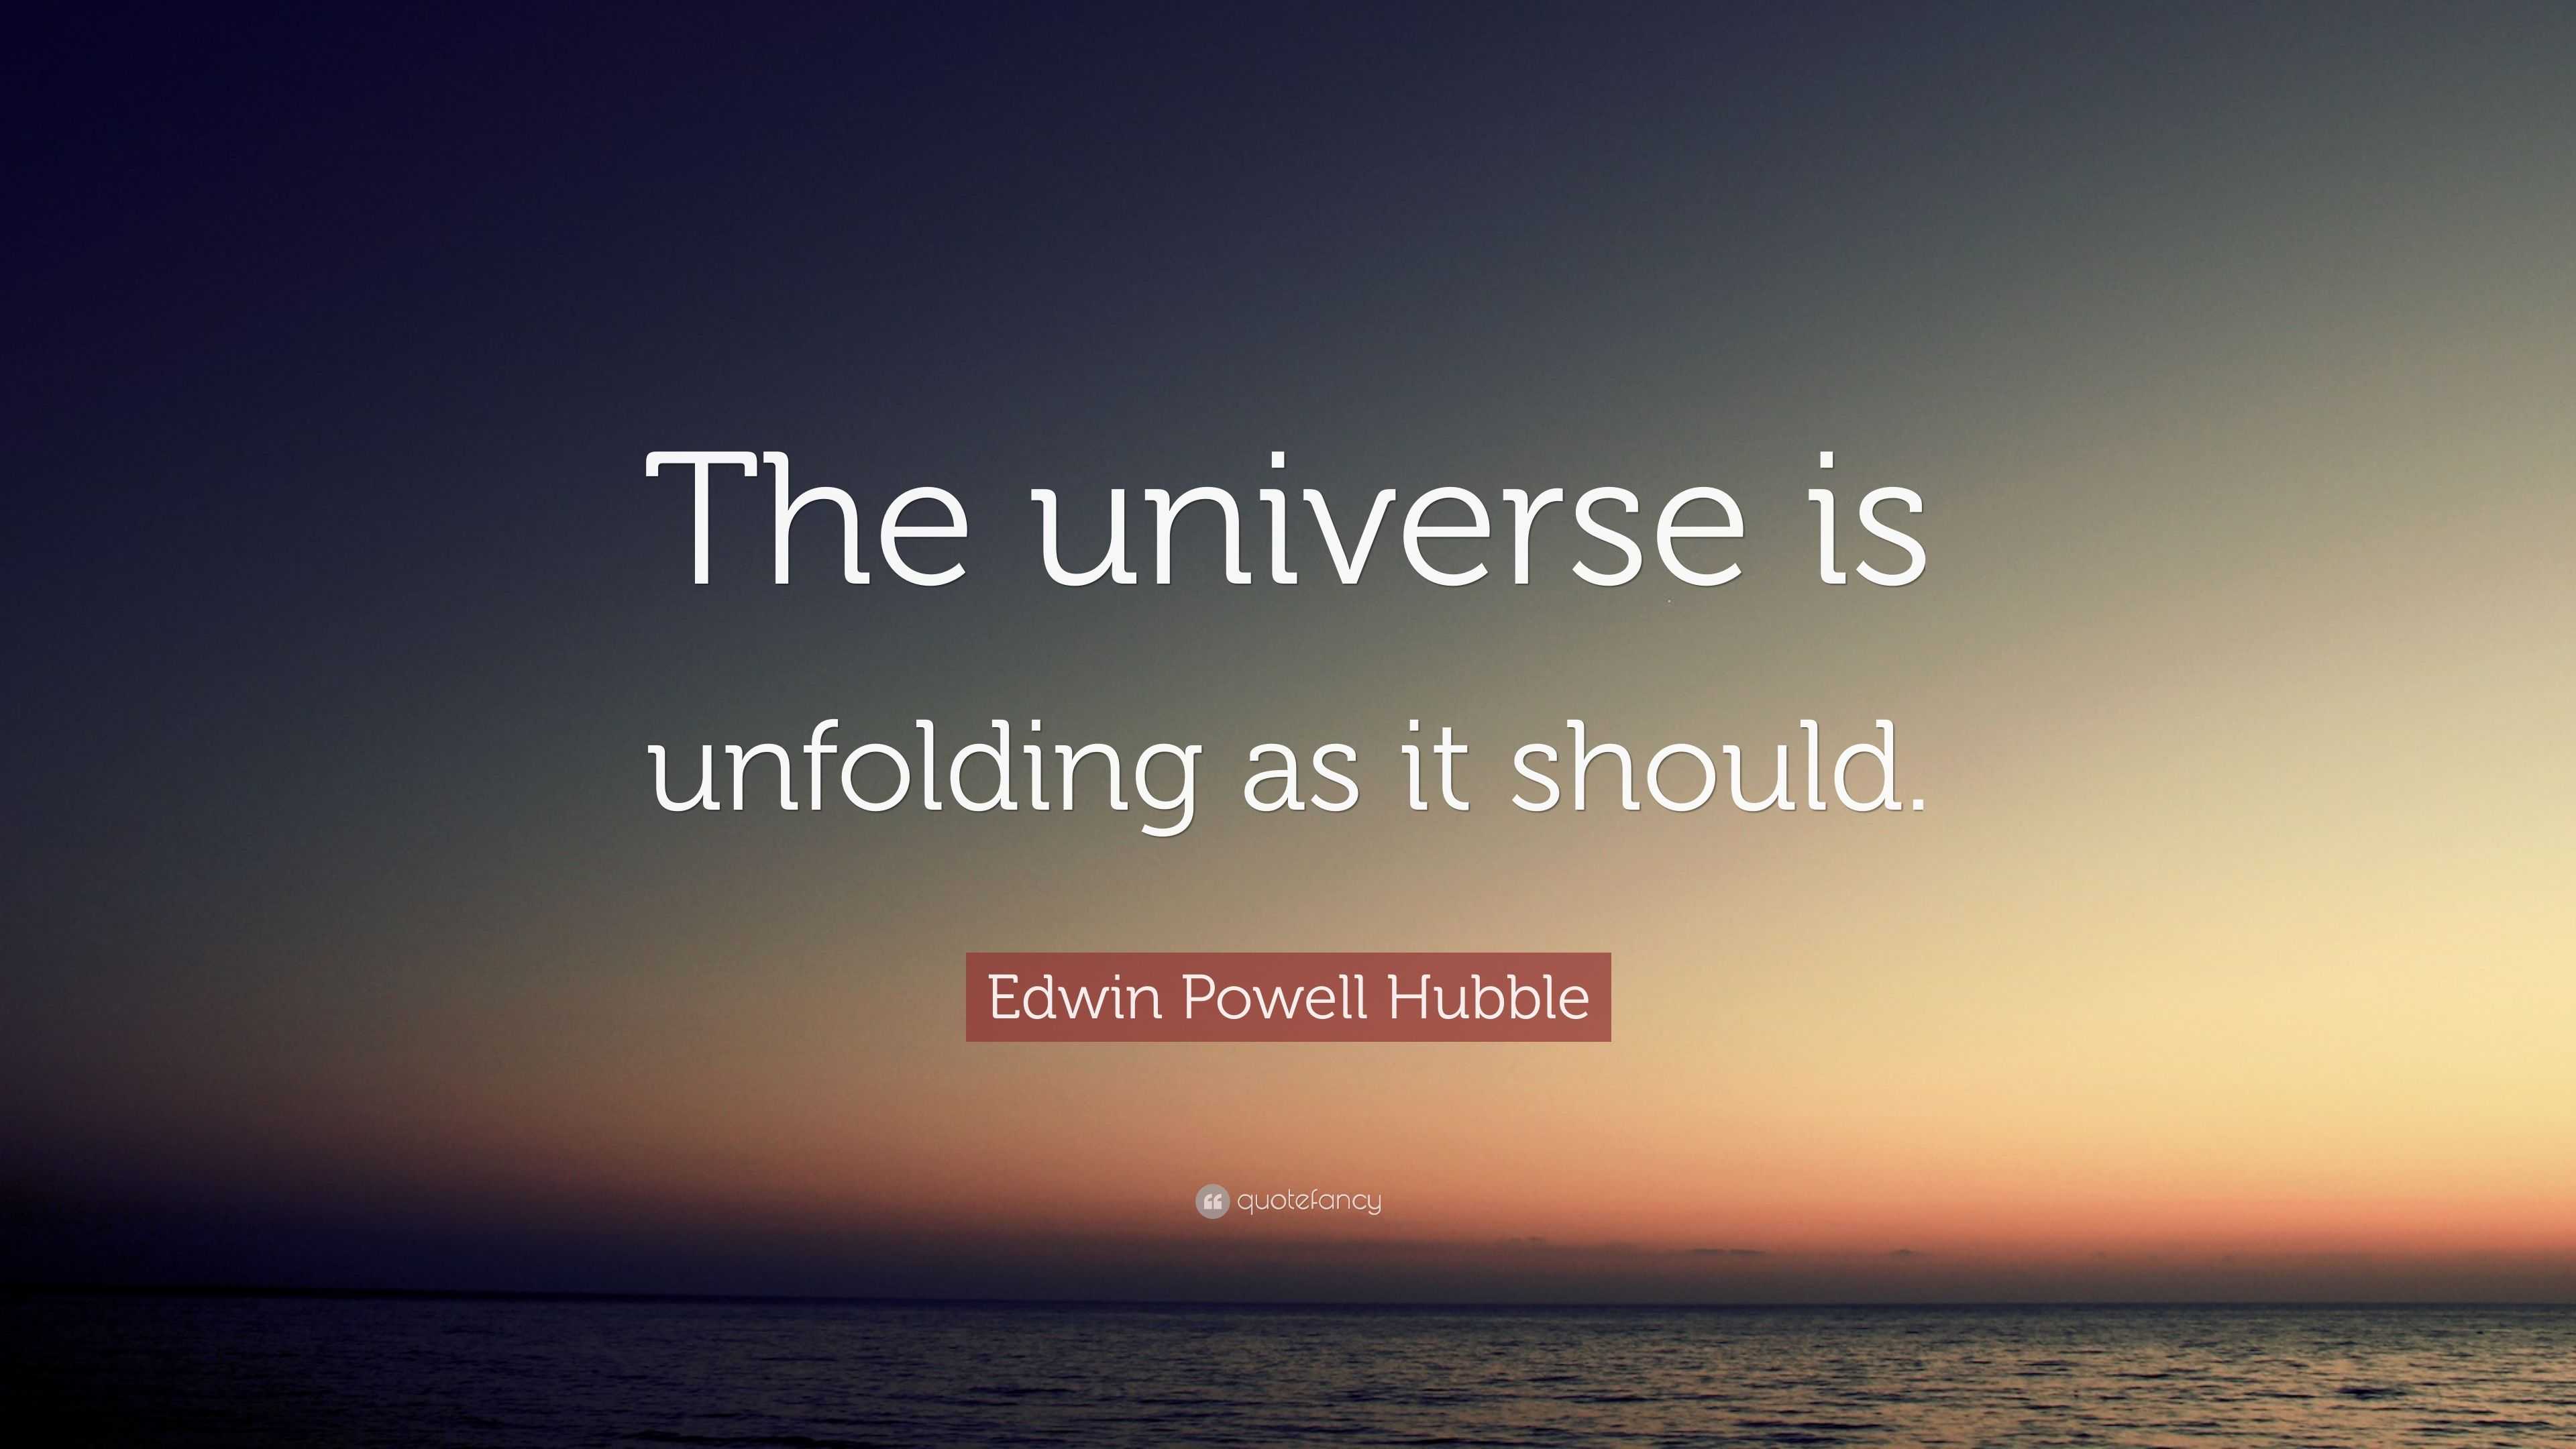 Edwin Powell Hubble Quote: “The universe is unfolding as it should.”